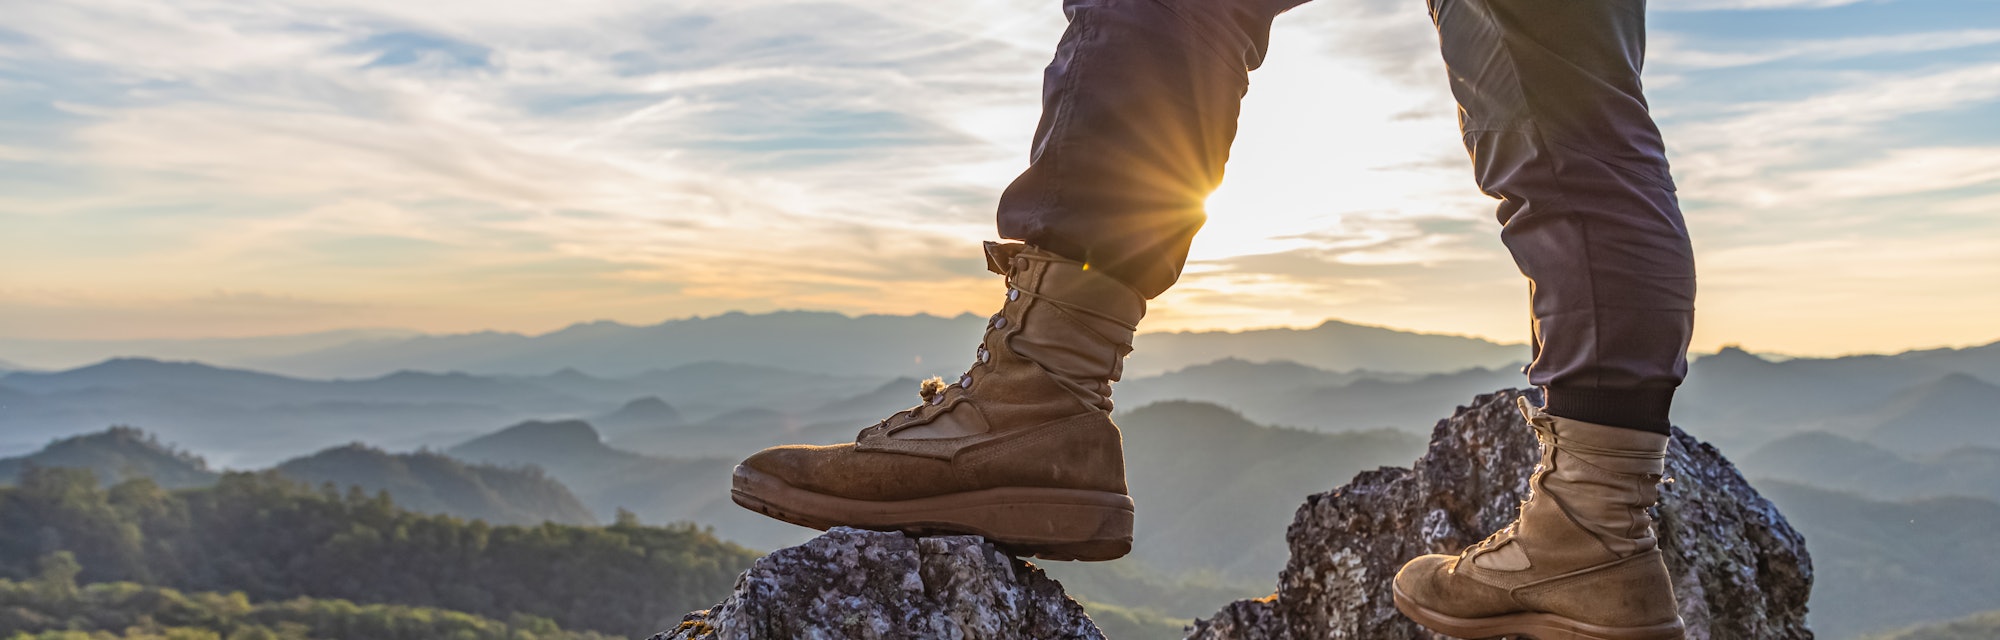 Hiker standing on top mountain sunset background. Hiker men's hiking living healthy active lifestyle...